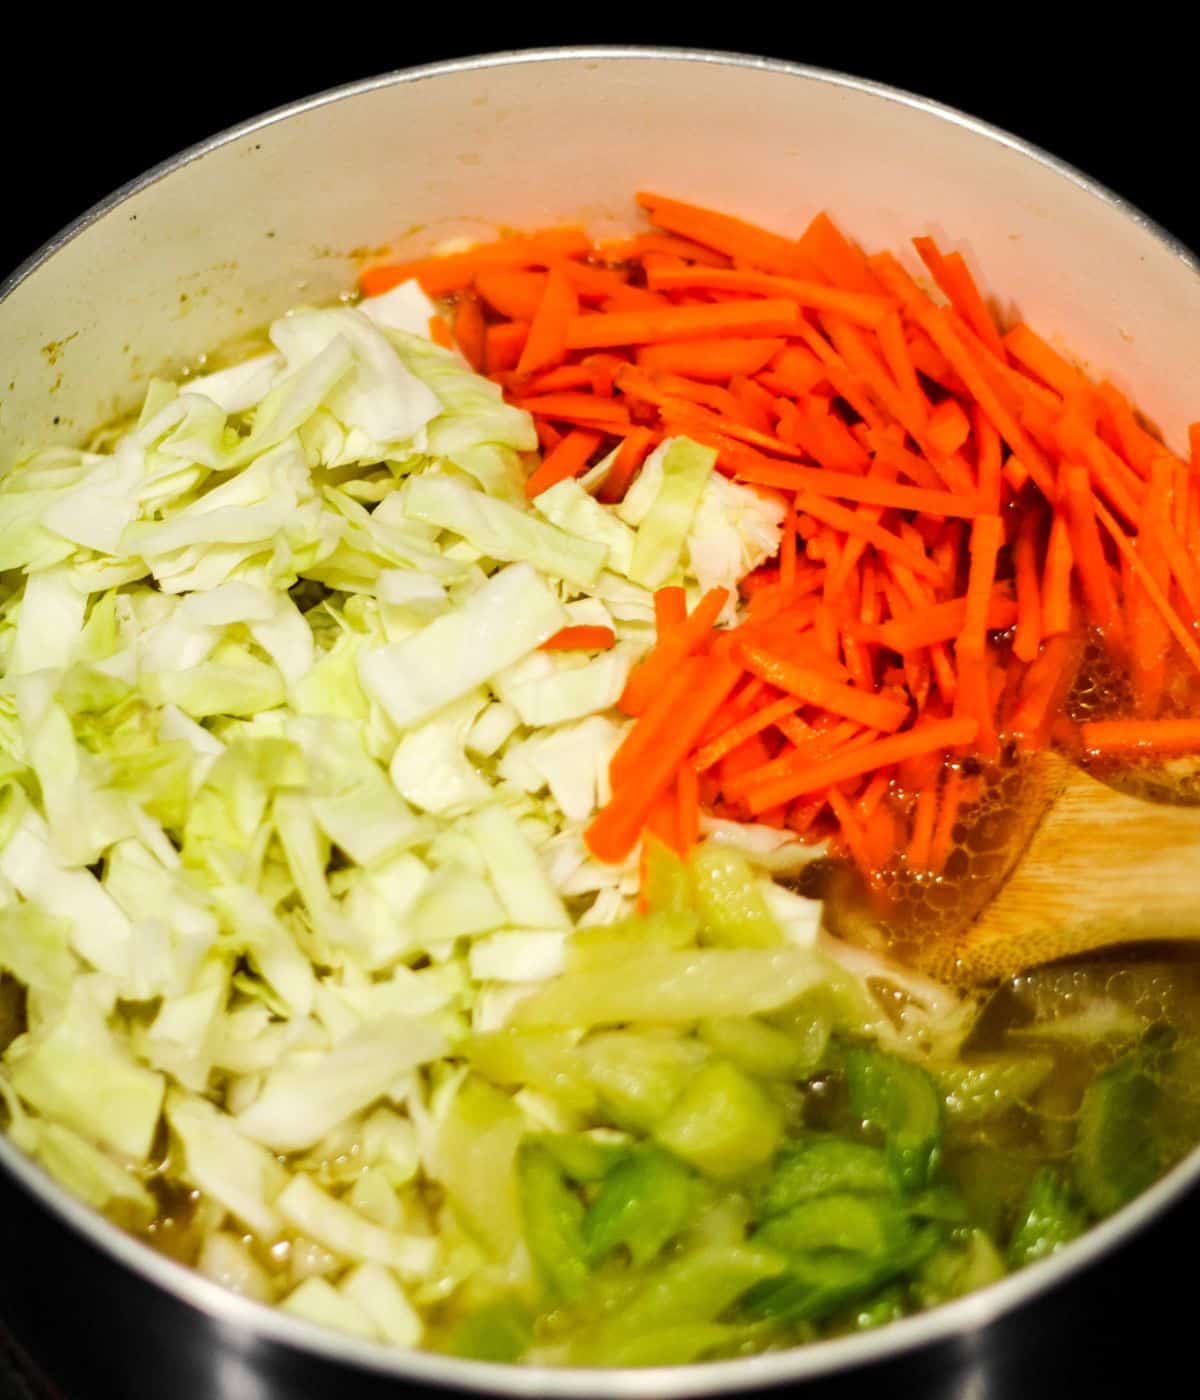 Cooking carrots, celery, and cabbage into the dutch oven.